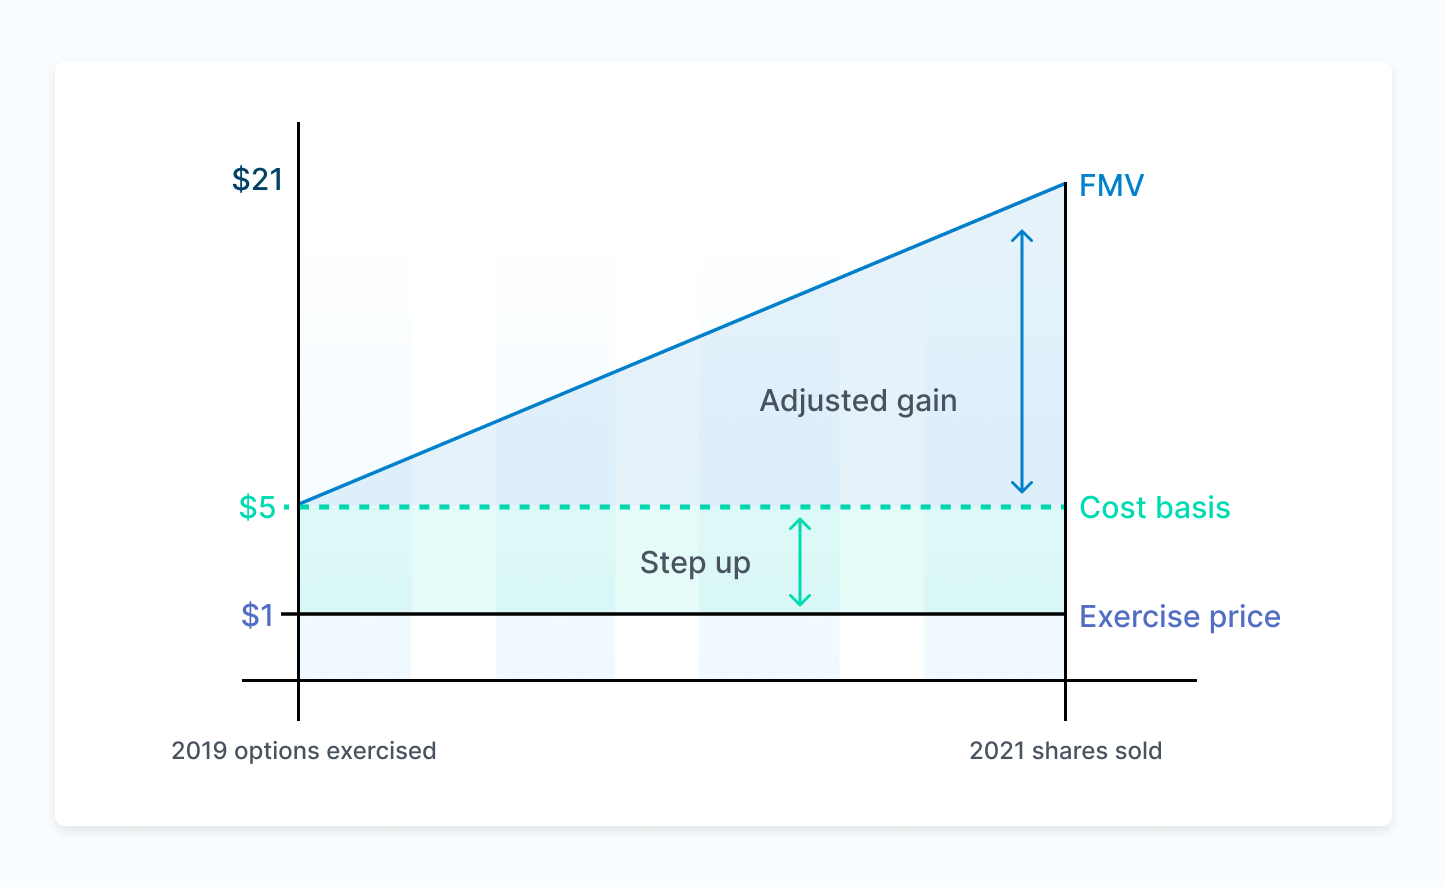 Illustration of stepped-up cost basis